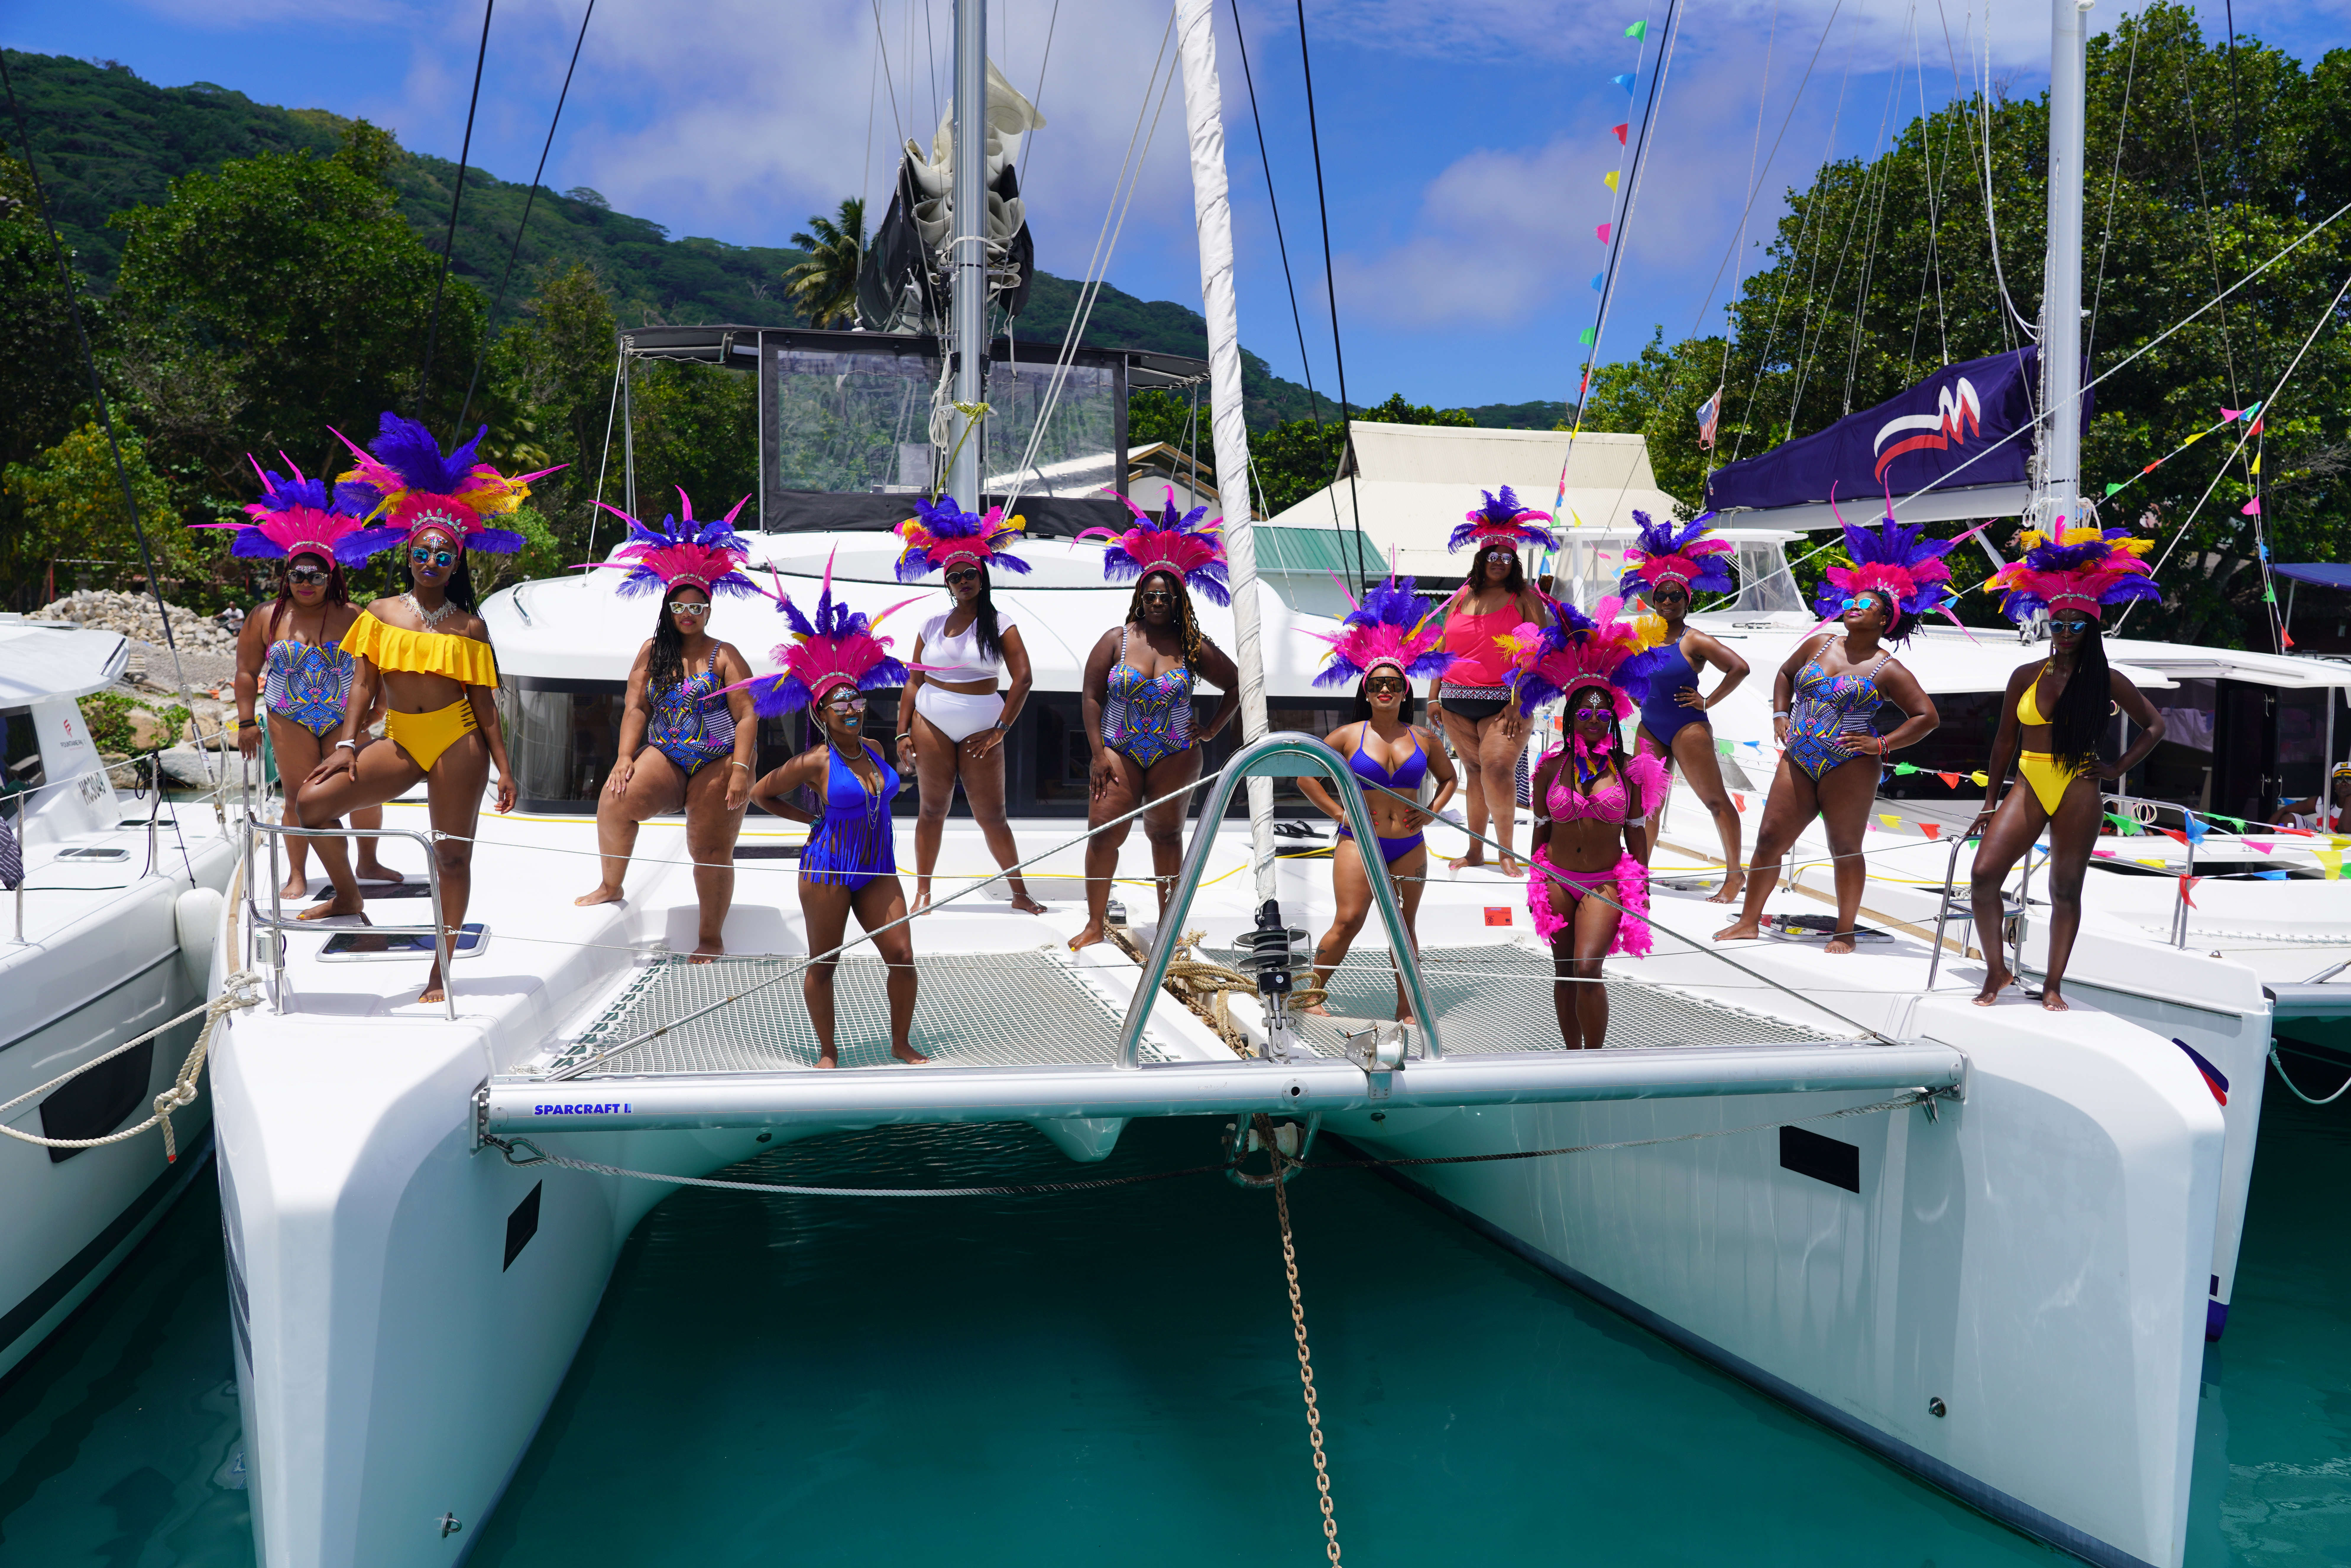 How A Chicago Native Created 'Yacht Week East Africa' For Black Travelers